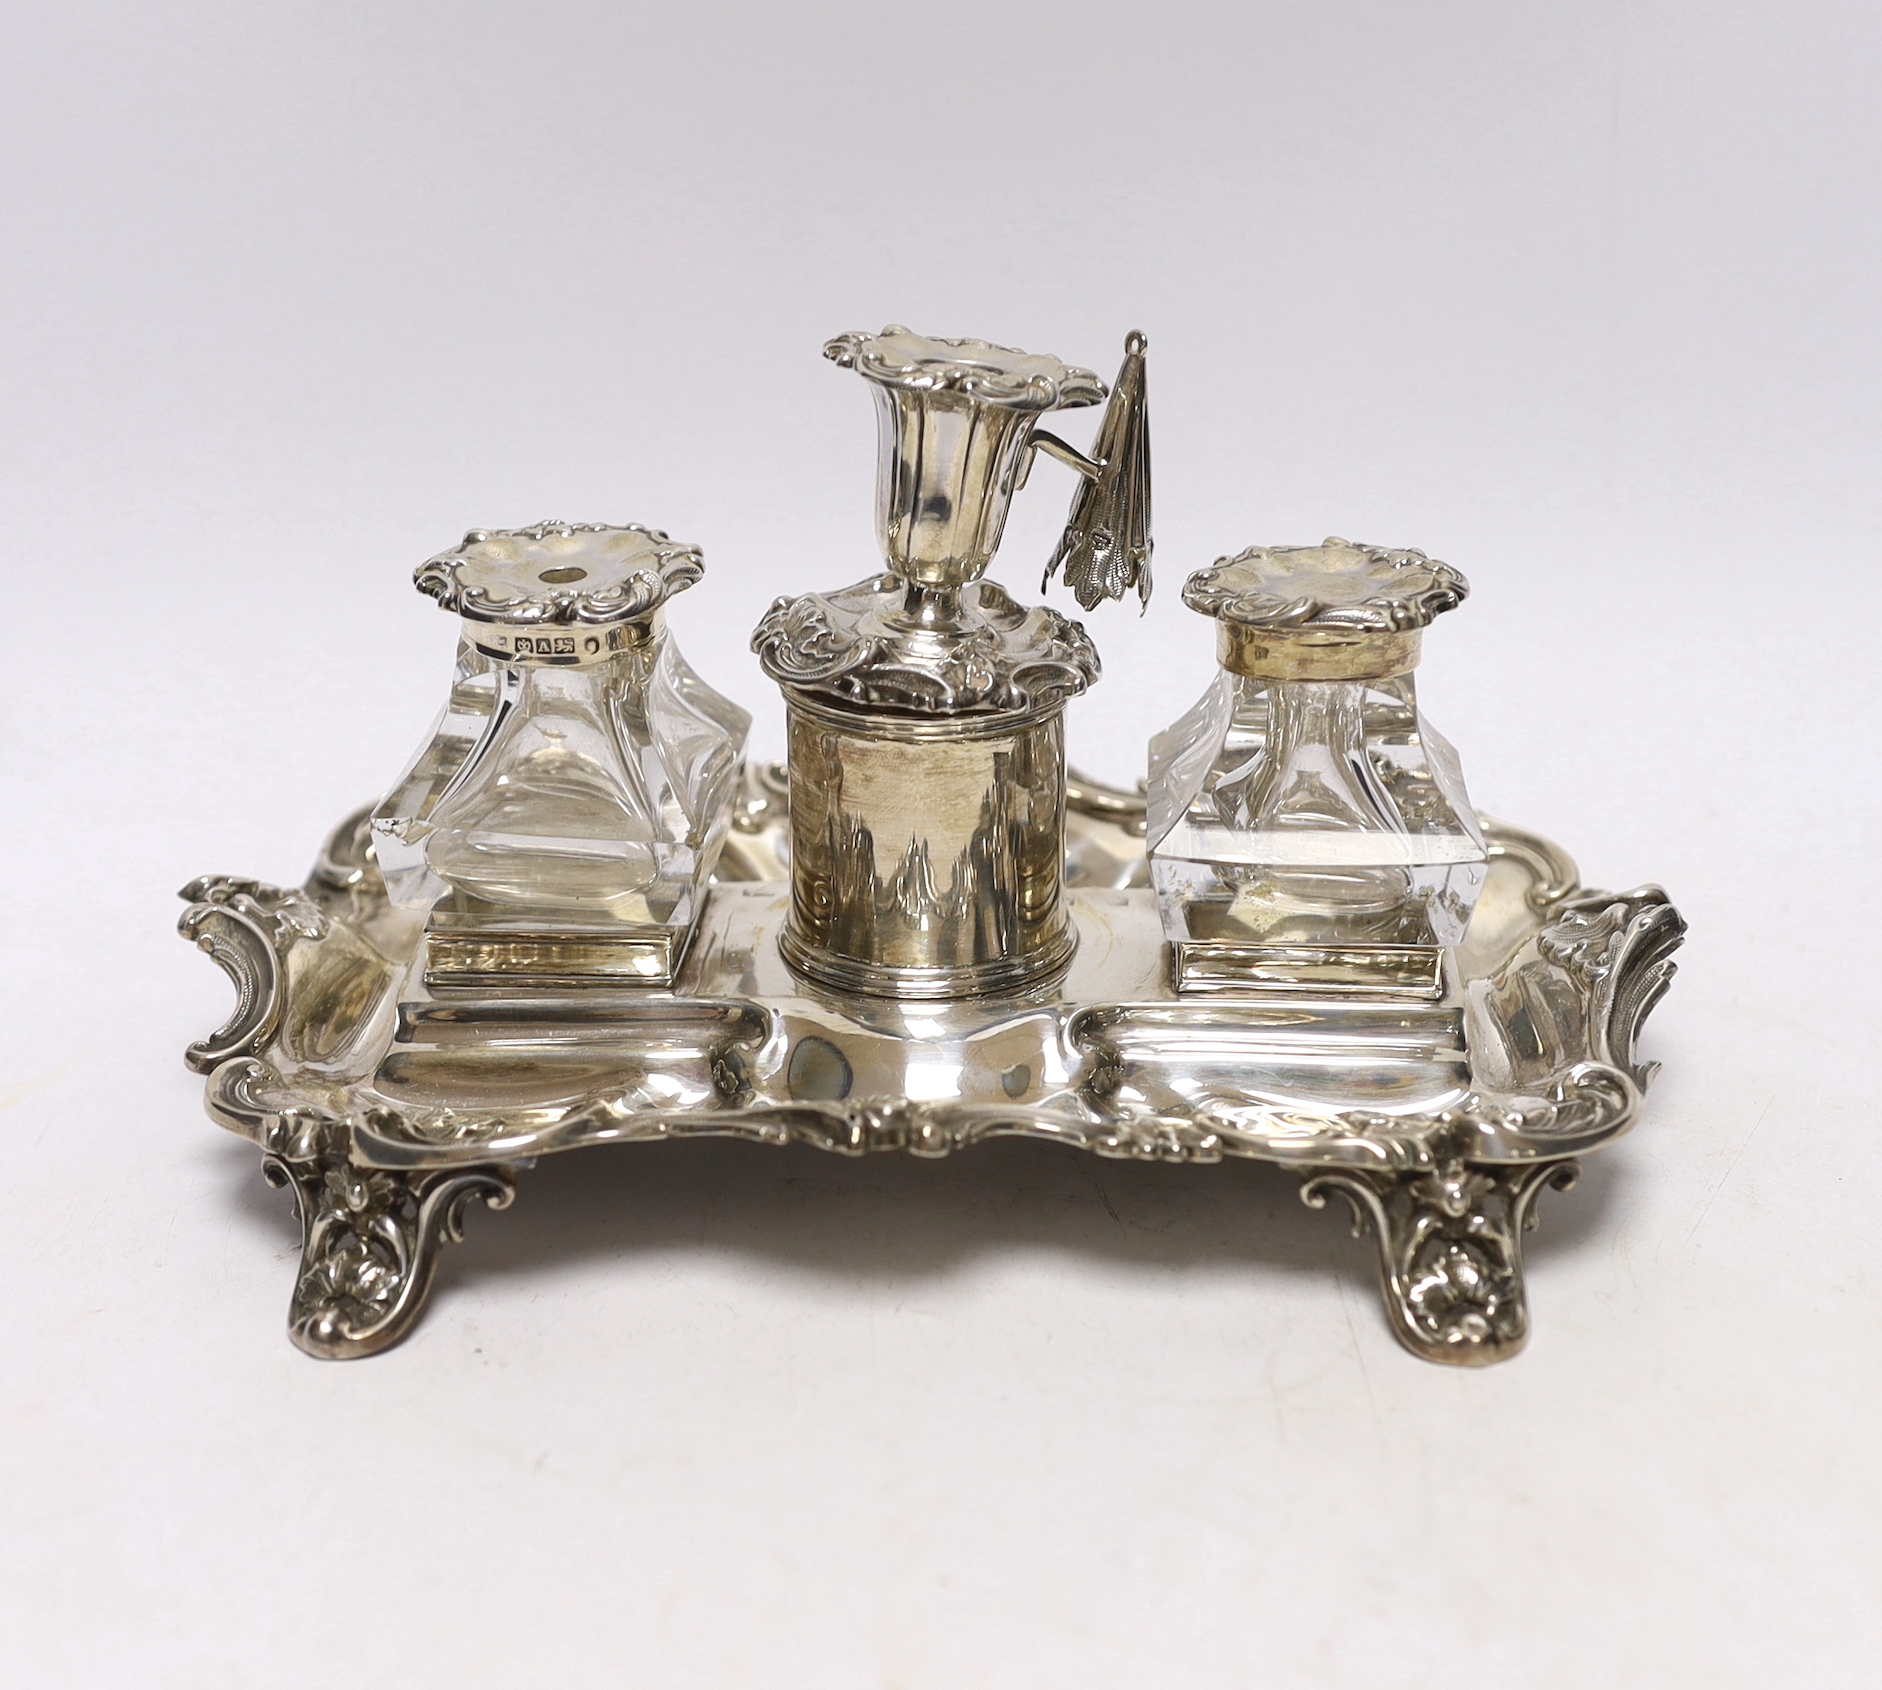 An early Victorian ornate silver inkstand, with two mounted glass wells and central taperstick, Henry Wilkinson & Co, Sheffield, 1844, 21cm                                                                                 